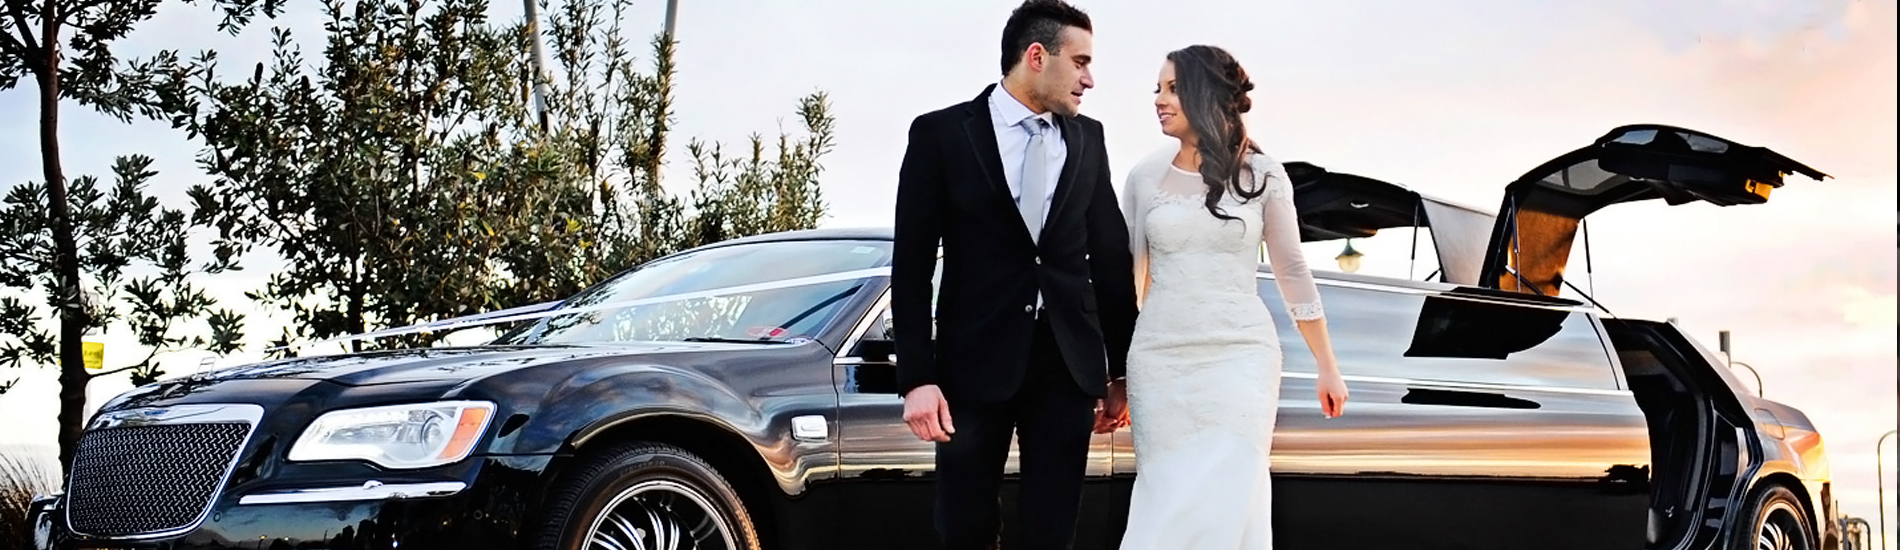 Air Side Limousine Service for wedding